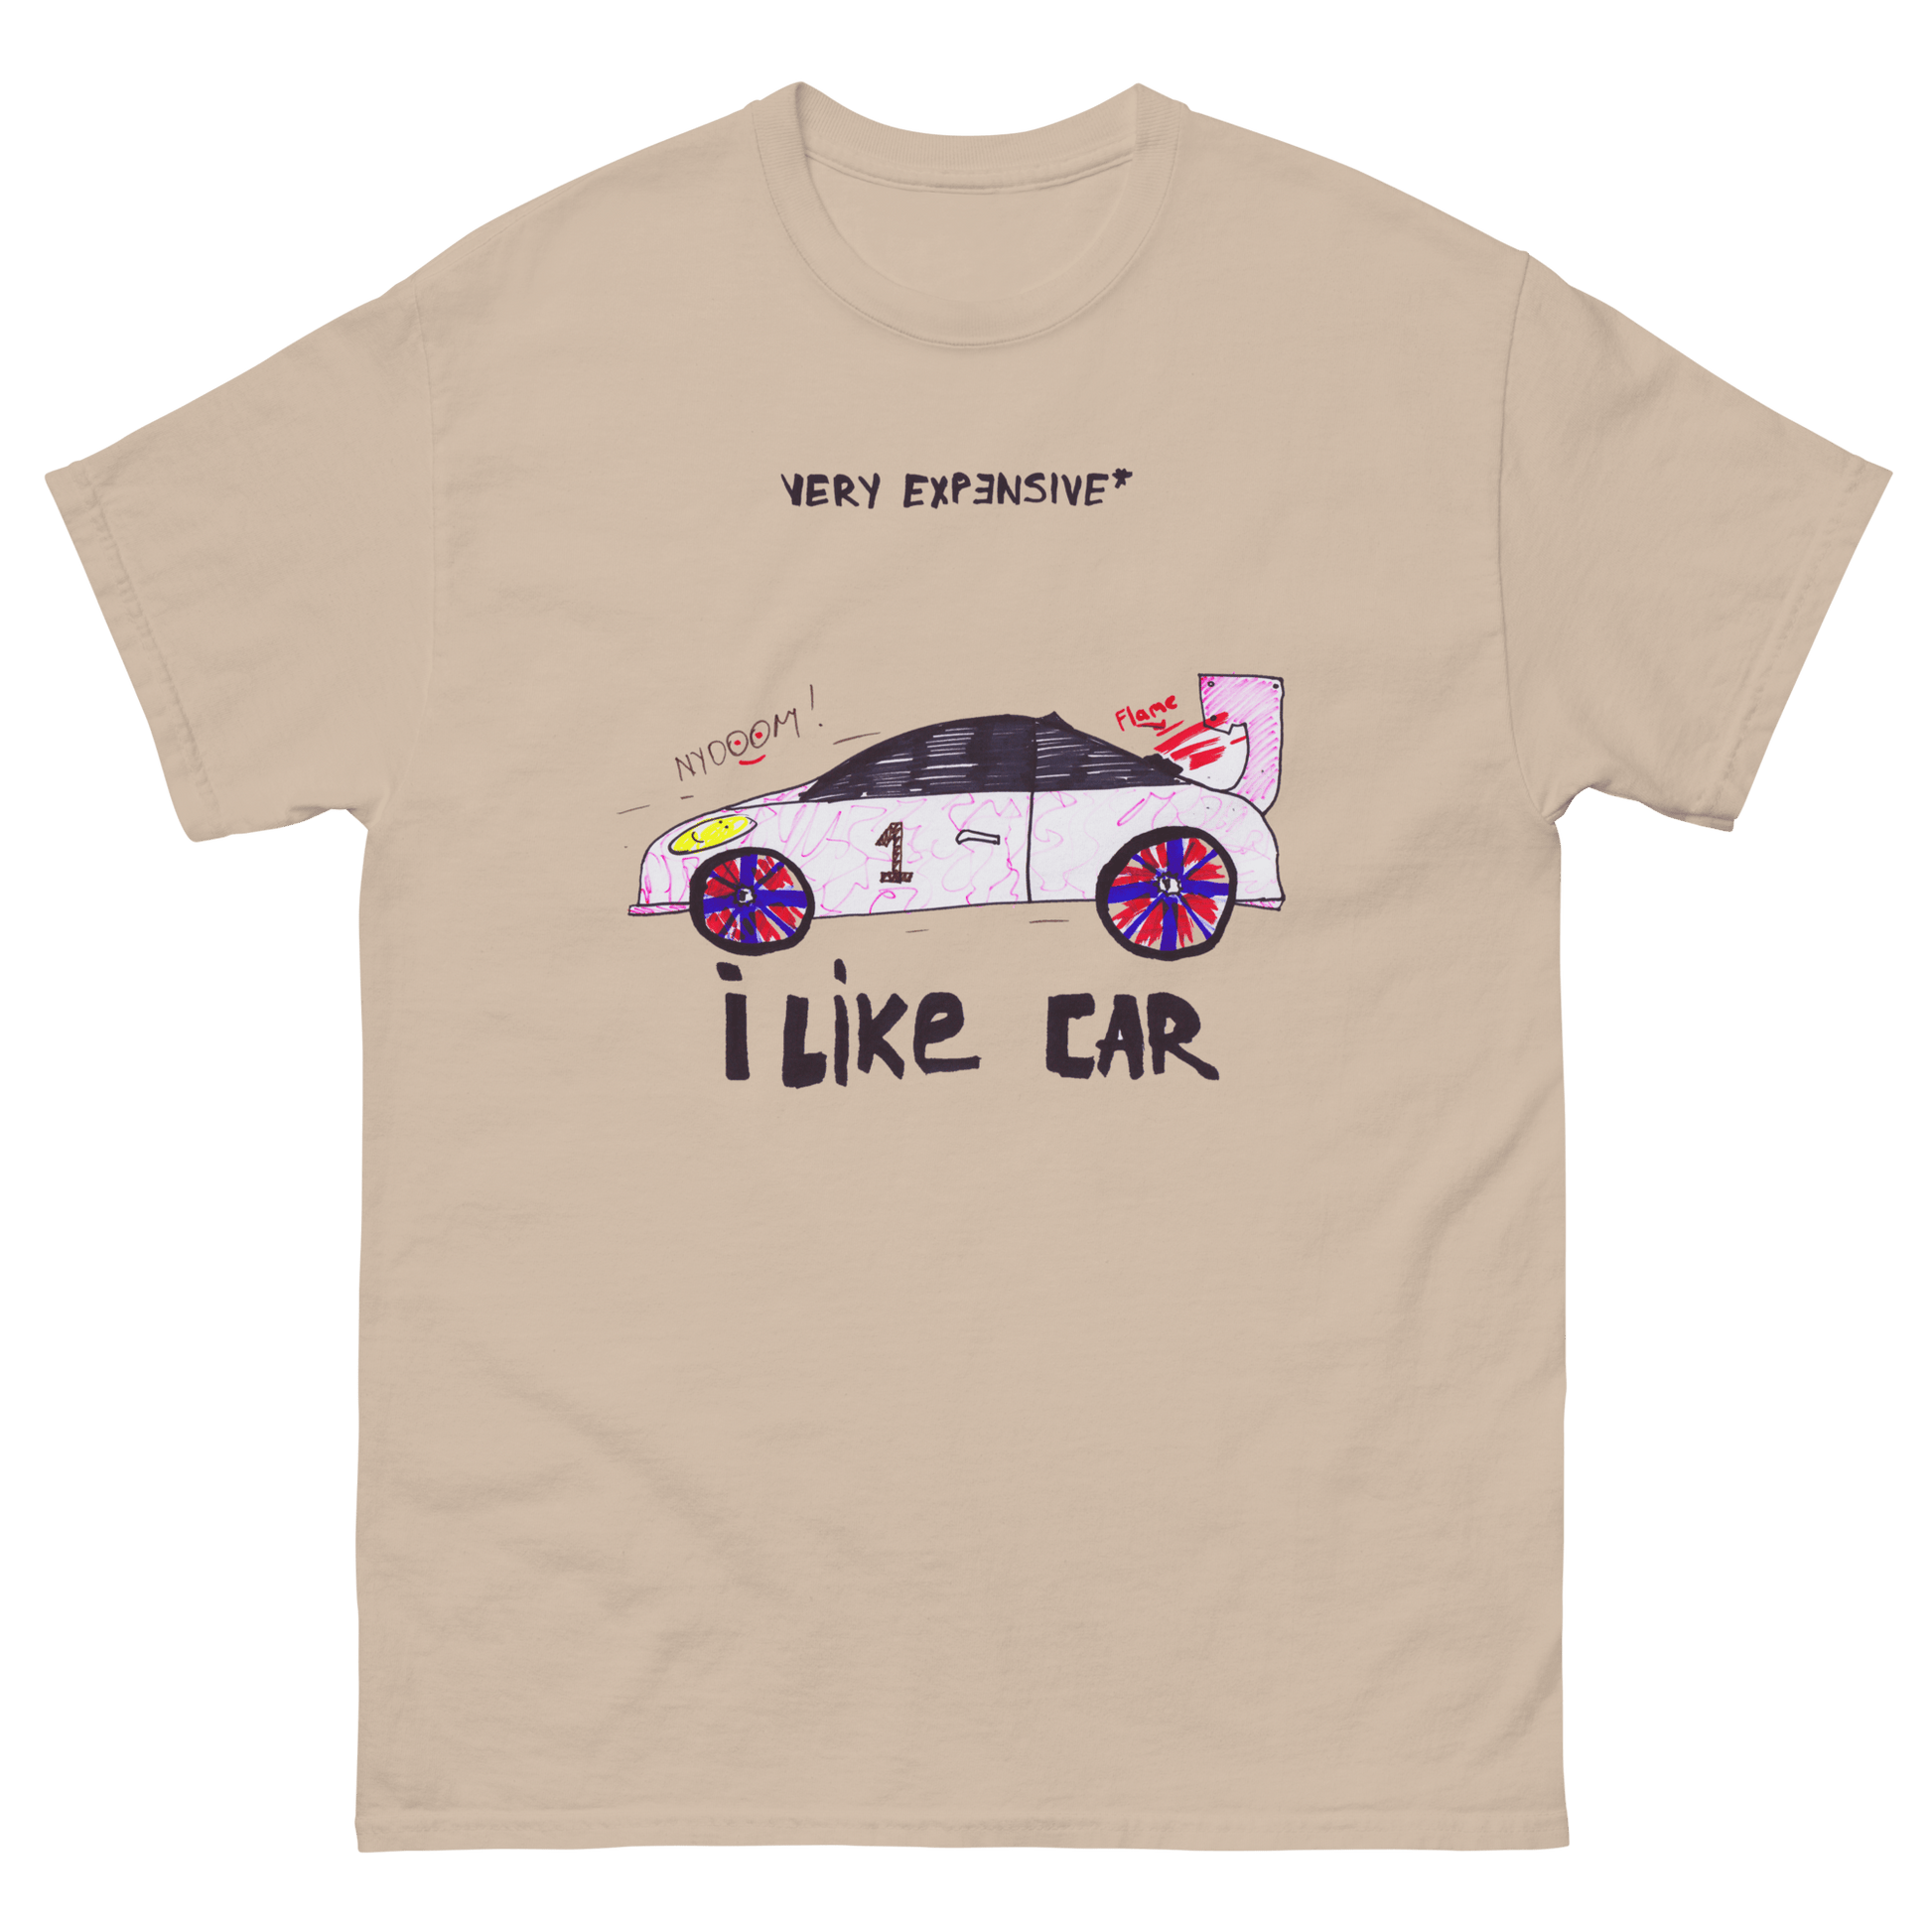 Childish Car Drawing T-shirt Design I Like Car / Very Expensive* - Very Expensive*